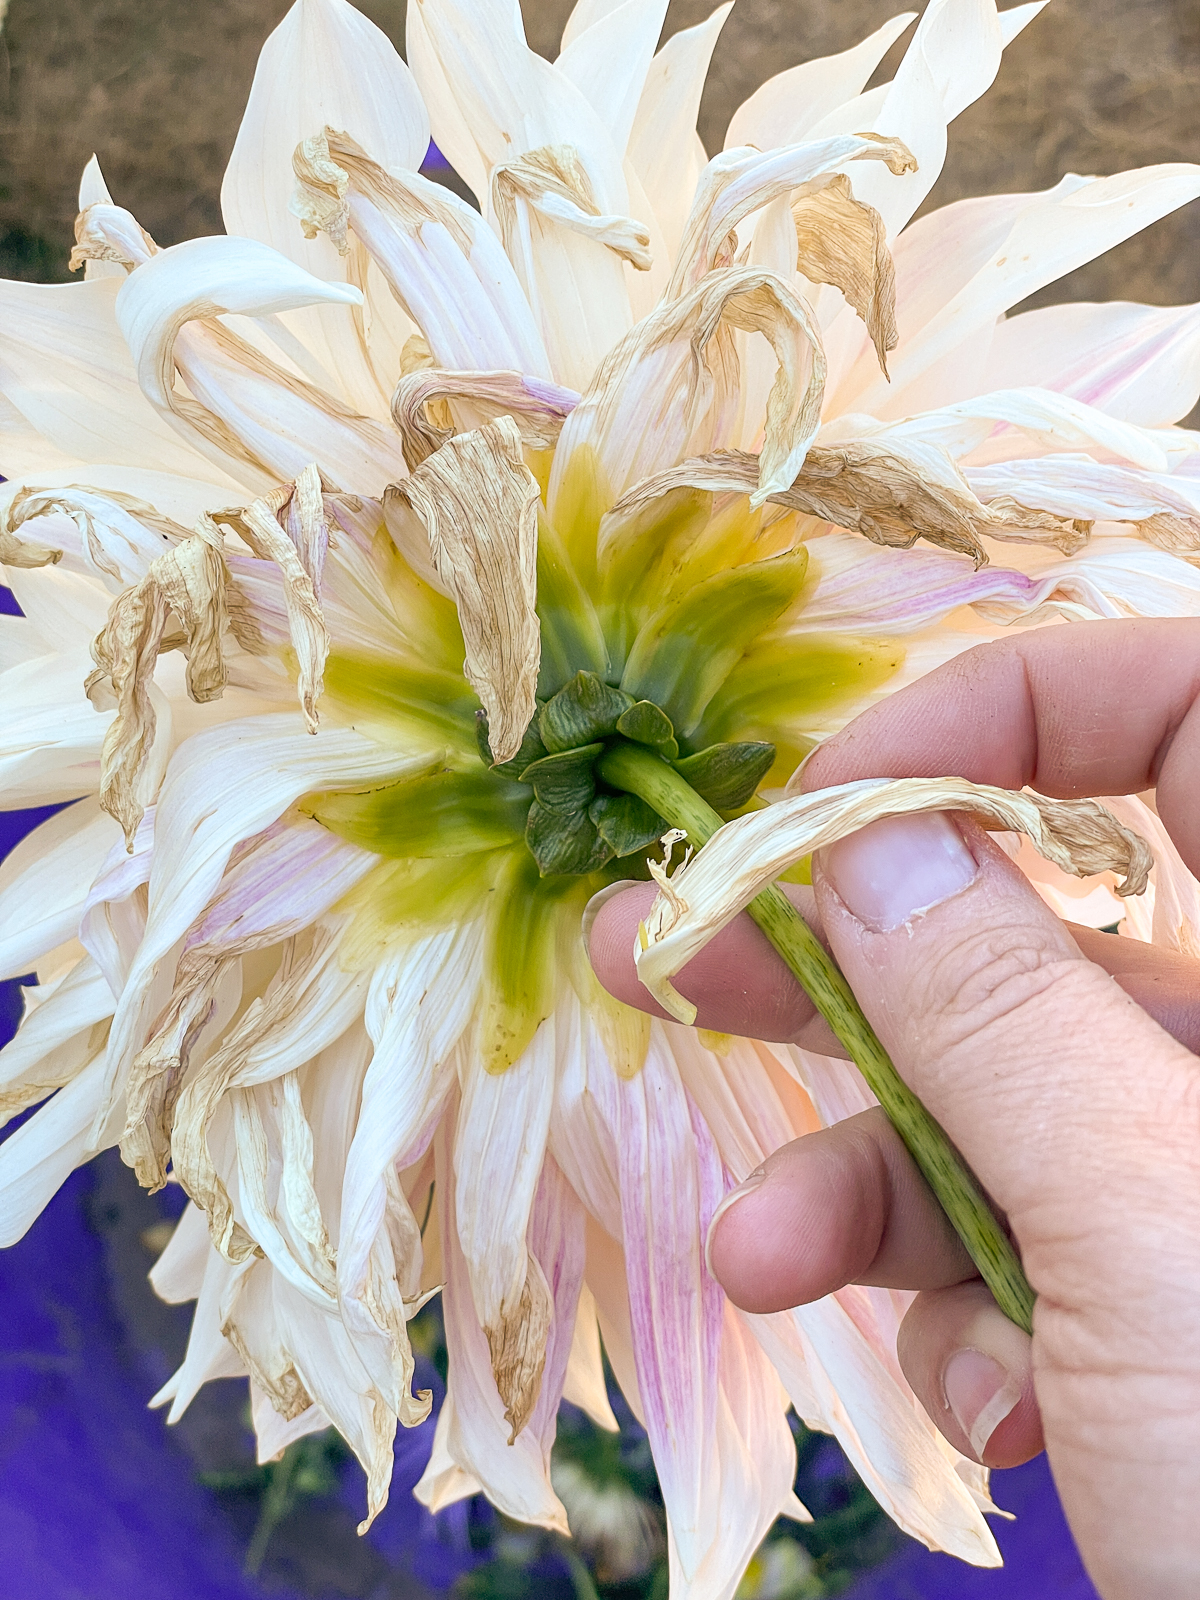 removing brown petals from dahlia before putting the stem in a vase